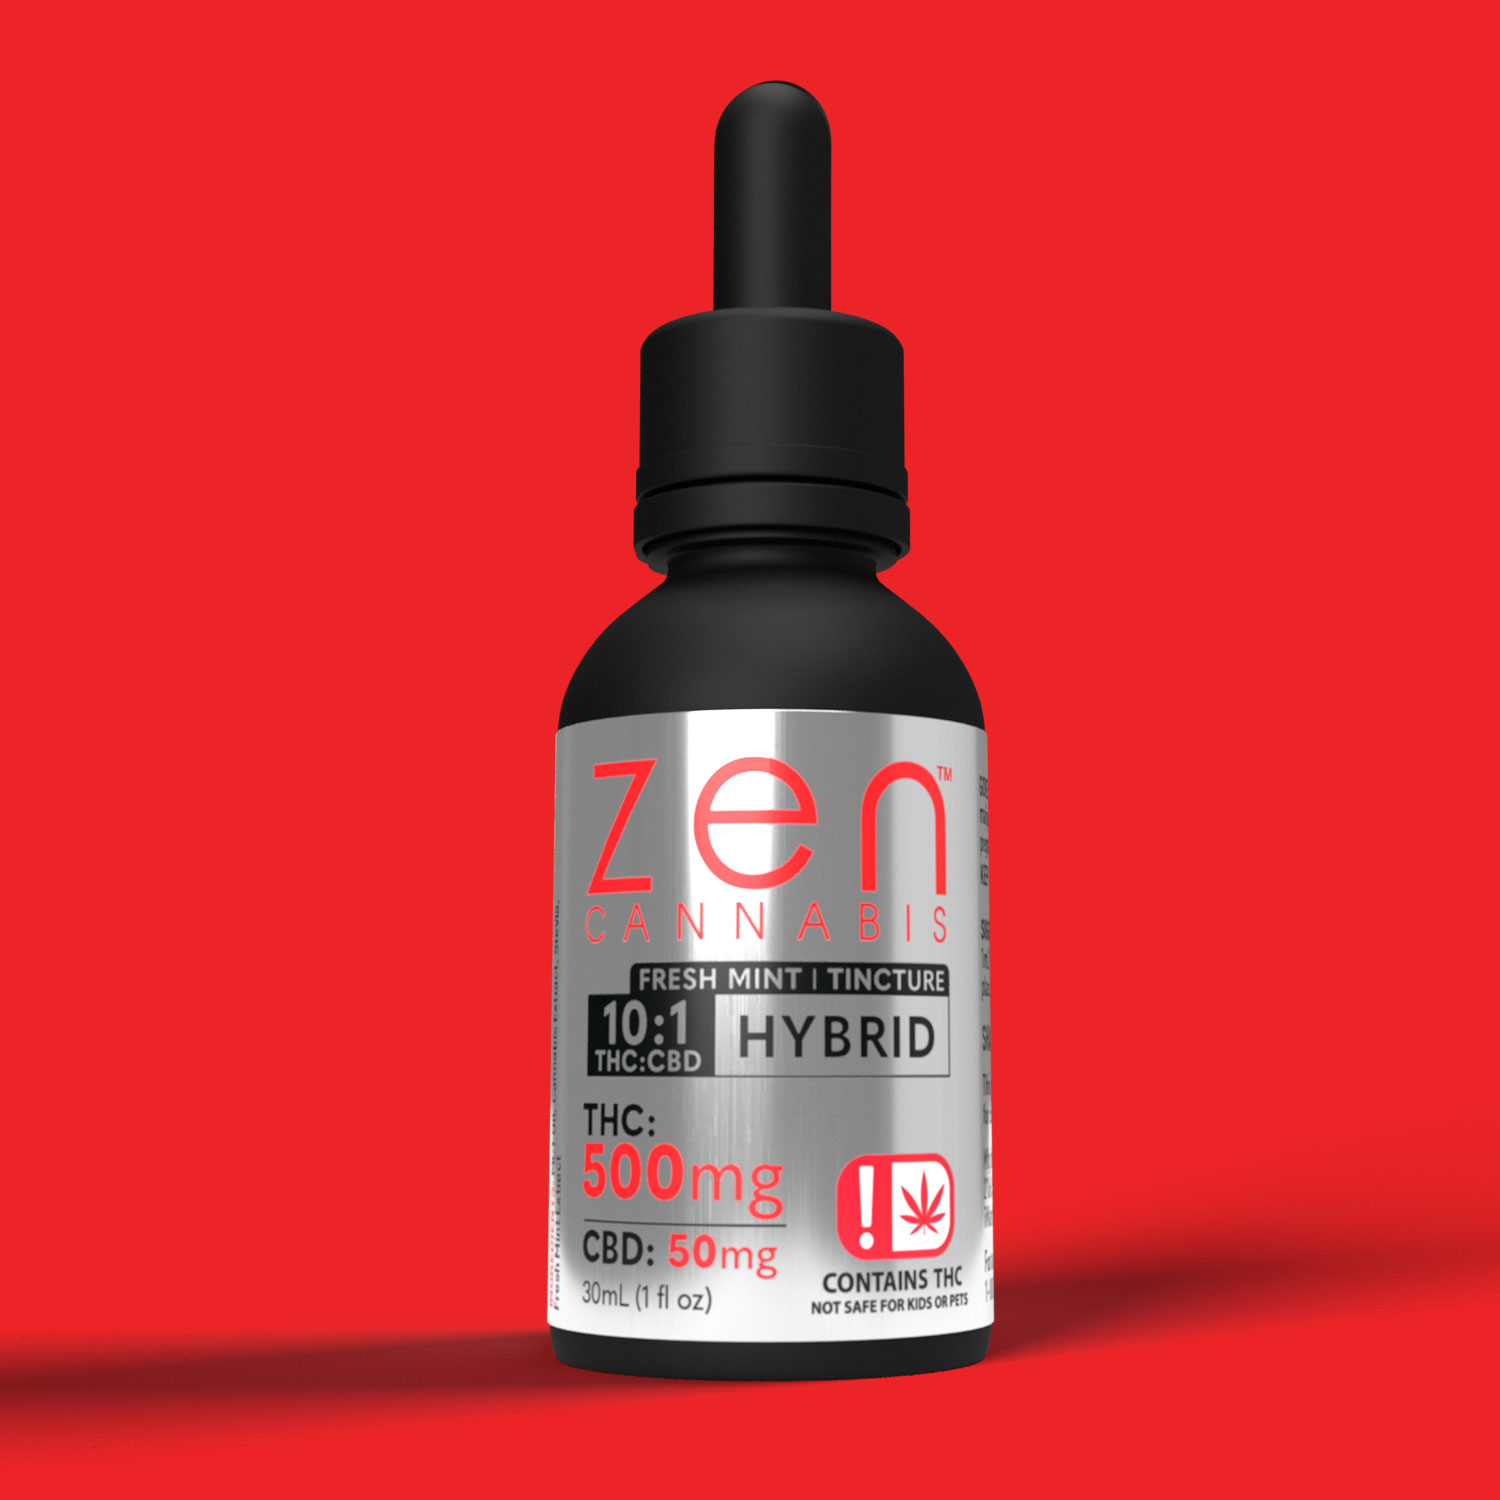 FRESH MINT
500mg THC per bottle
50mg CBD per bottle
You asked...We delivered. Now with five times more THC and CBD per bottle. Bursting with fresh mint flavor, the Zen Cannabis Hybrid tincture provides the incredible benefits of both THC and CBD. 
500mg THC | 50mg CBD
1oz (30ml)